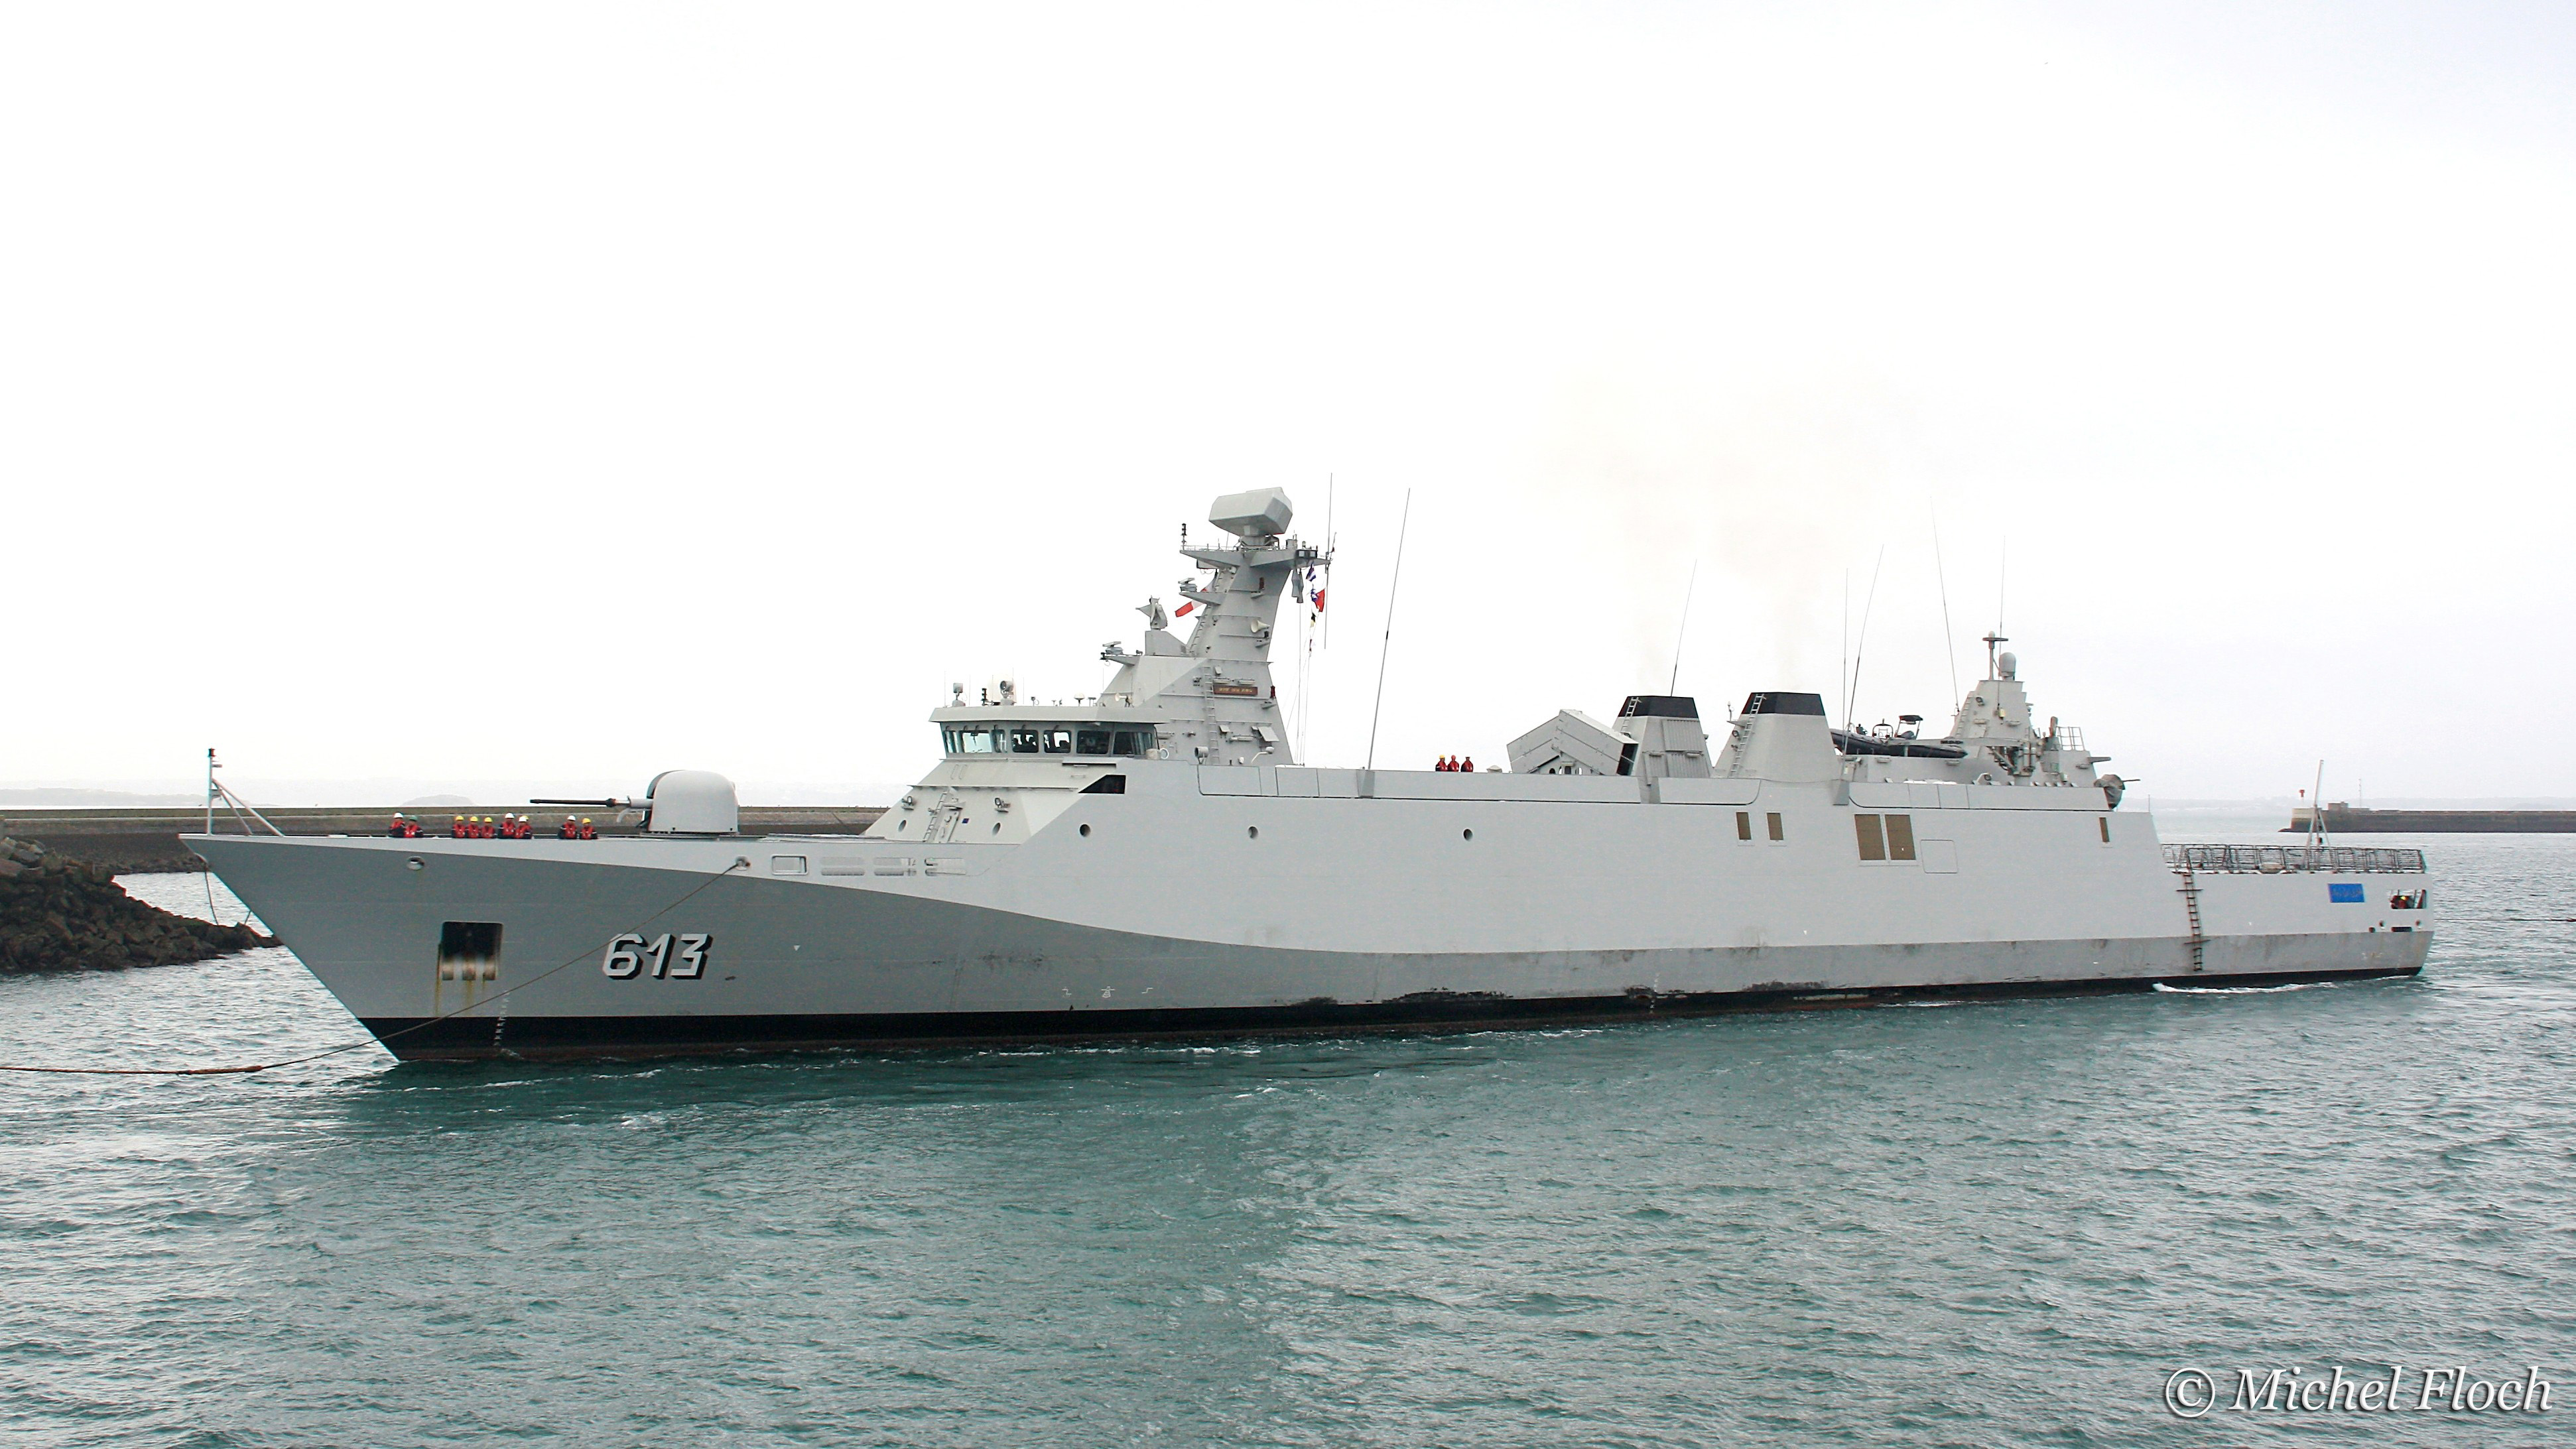 Royal Moroccan Navy Sigma class frigates / Frégates marocaines multimissions Sigma - Page 18 15522770928_799d9ab399_o